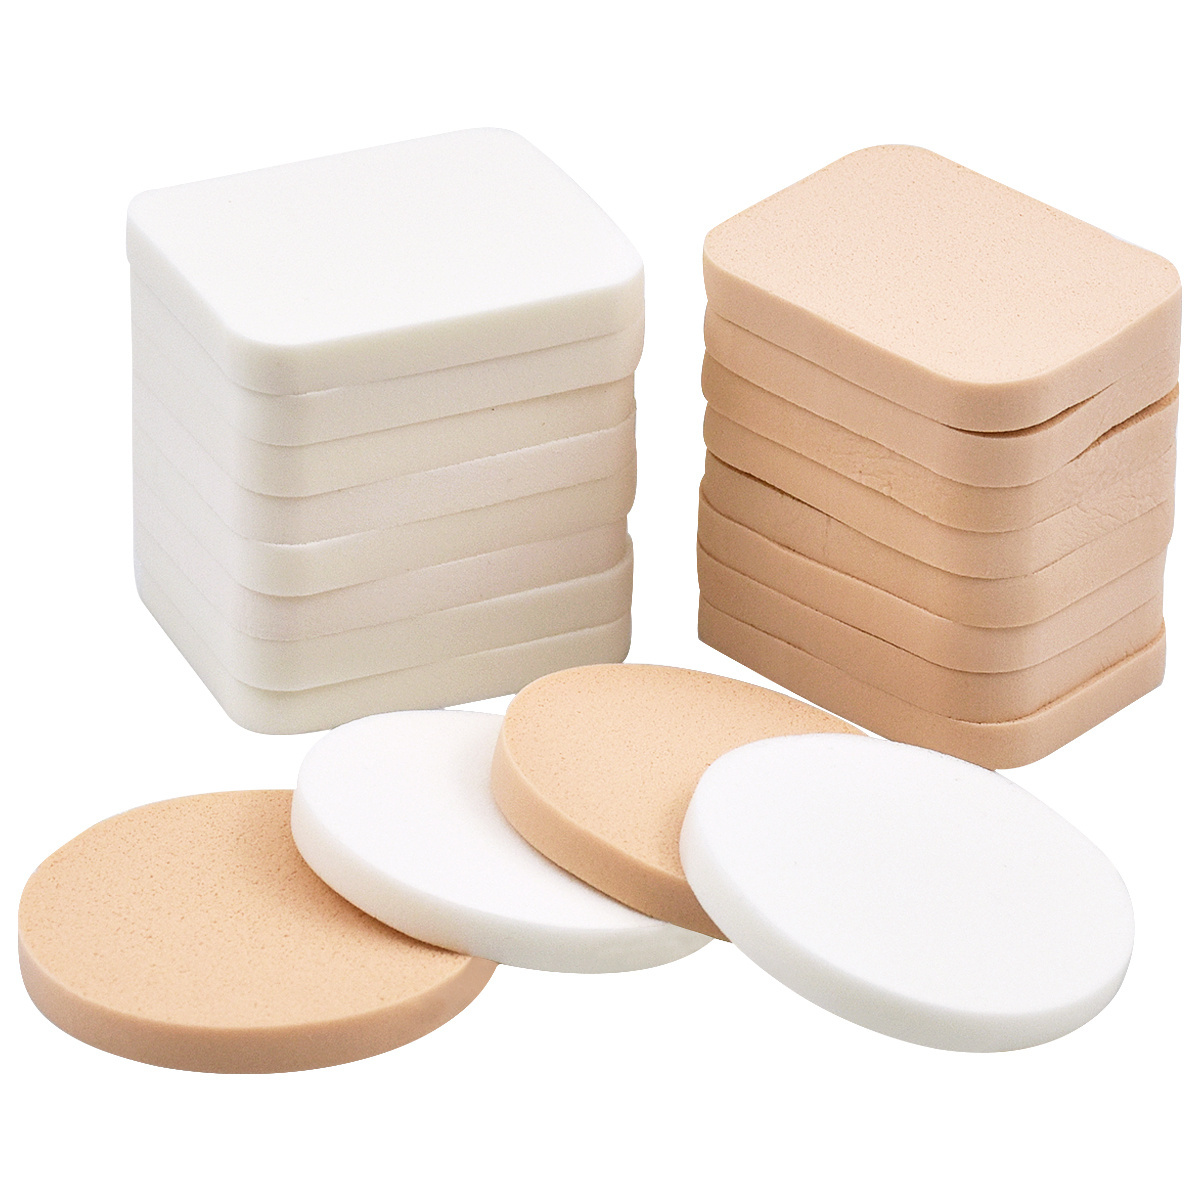 

20 Pcs Dual-use Makeup Sponges For Flawless Foundation Application